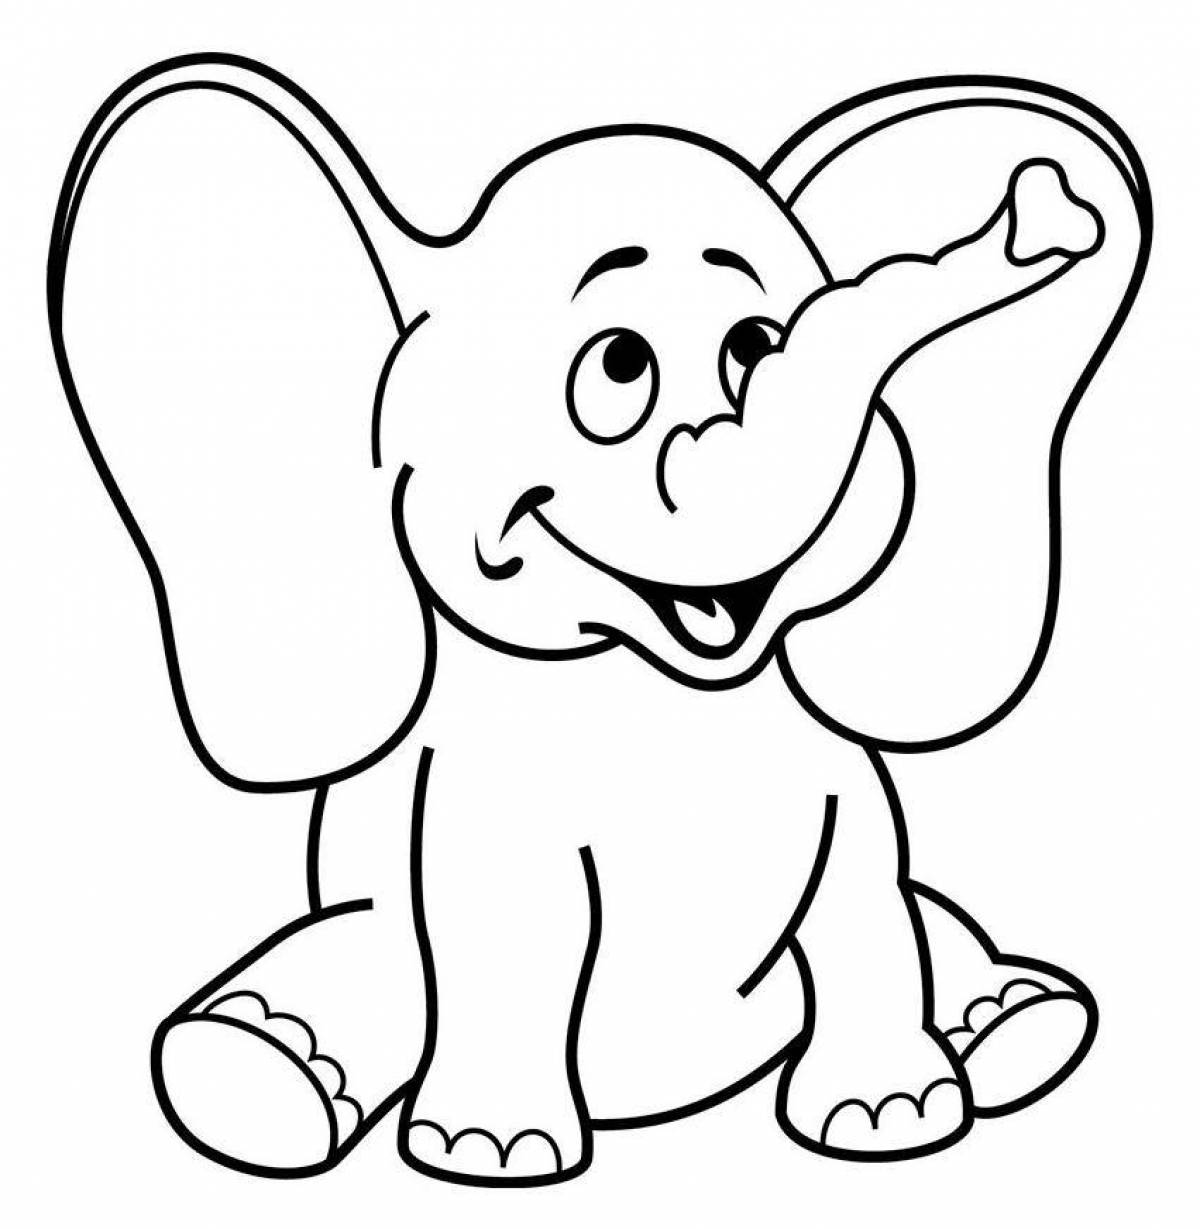 Elephant for children 3 4 years old #5